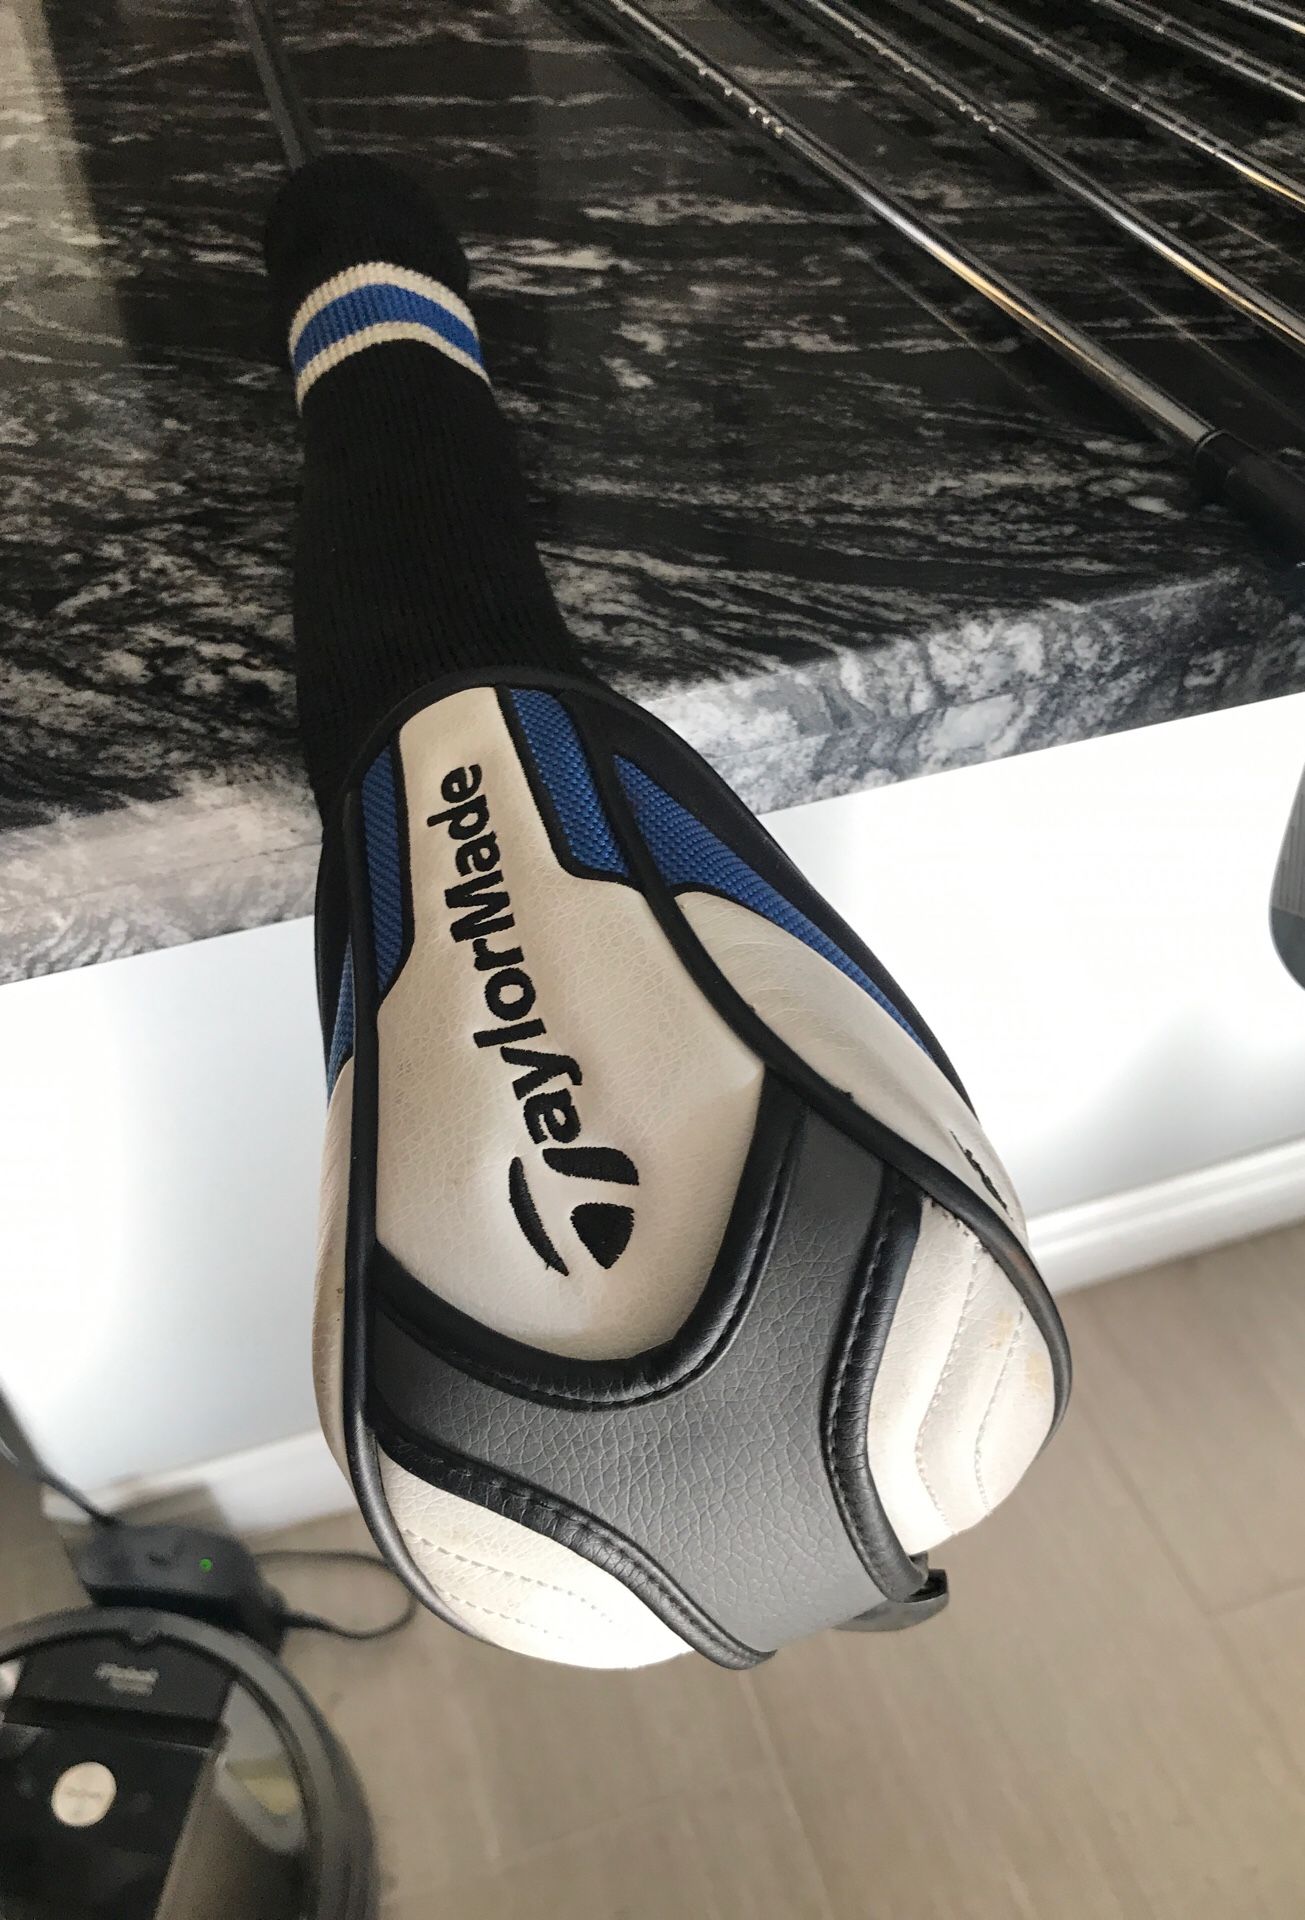 Taylormade Jetspeed 3 wood w/ cover